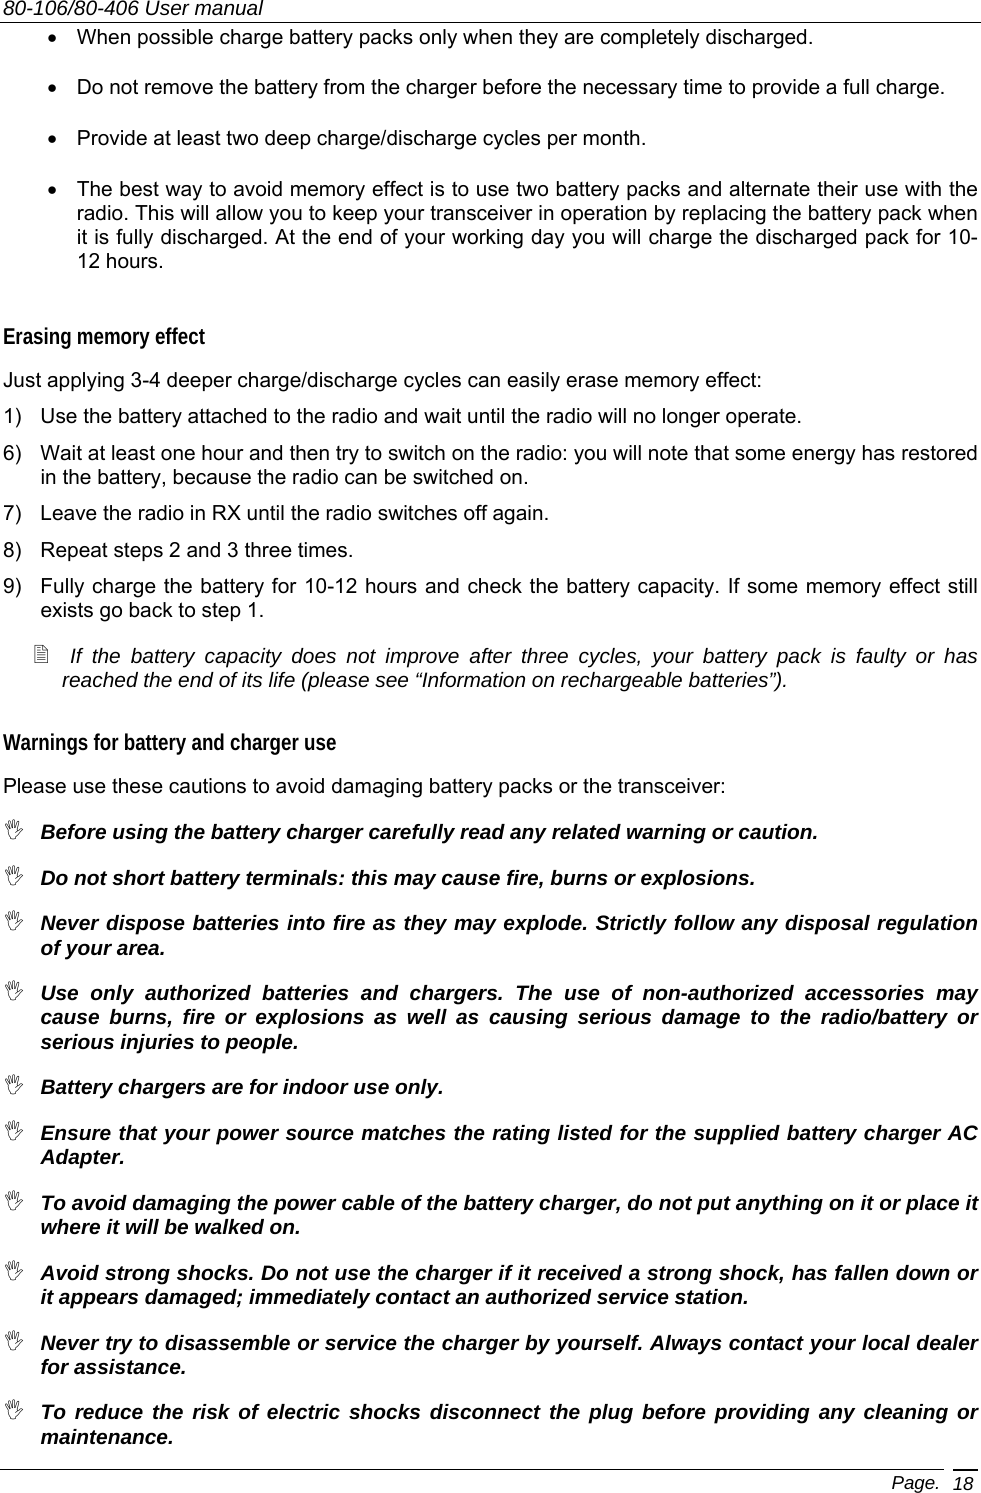 80-106/80-406 User manual Page. 18 •  When possible charge battery packs only when they are completely discharged.  •  Do not remove the battery from the charger before the necessary time to provide a full charge. •  Provide at least two deep charge/discharge cycles per month. •  The best way to avoid memory effect is to use two battery packs and alternate their use with the radio. This will allow you to keep your transceiver in operation by replacing the battery pack when it is fully discharged. At the end of your working day you will charge the discharged pack for 10-12 hours. Erasing memory effect Just applying 3-4 deeper charge/discharge cycles can easily erase memory effect: 1)  Use the battery attached to the radio and wait until the radio will no longer operate. 6)  Wait at least one hour and then try to switch on the radio: you will note that some energy has restored in the battery, because the radio can be switched on. 7)  Leave the radio in RX until the radio switches off again. 8)  Repeat steps 2 and 3 three times. 9)  Fully charge the battery for 10-12 hours and check the battery capacity. If some memory effect still exists go back to step 1.  If the battery capacity does not improve after three cycles, your battery pack is faulty or has reached the end of its life (please see “Information on rechargeable batteries”).   Warnings for battery and charger use Please use these cautions to avoid damaging battery packs or the transceiver:  Before using the battery charger carefully read any related warning or caution.  Do not short battery terminals: this may cause fire, burns or explosions.  Never dispose batteries into fire as they may explode. Strictly follow any disposal regulation of your area.  Use only authorized batteries and chargers. The use of non-authorized accessories may cause burns, fire or explosions as well as causing serious damage to the radio/battery or serious injuries to people.  Battery chargers are for indoor use only.   Ensure that your power source matches the rating listed for the supplied battery charger AC Adapter.  To avoid damaging the power cable of the battery charger, do not put anything on it or place it where it will be walked on.   Avoid strong shocks. Do not use the charger if it received a strong shock, has fallen down or it appears damaged; immediately contact an authorized service station.   Never try to disassemble or service the charger by yourself. Always contact your local dealer for assistance.  To reduce the risk of electric shocks disconnect the plug before providing any cleaning or maintenance. 